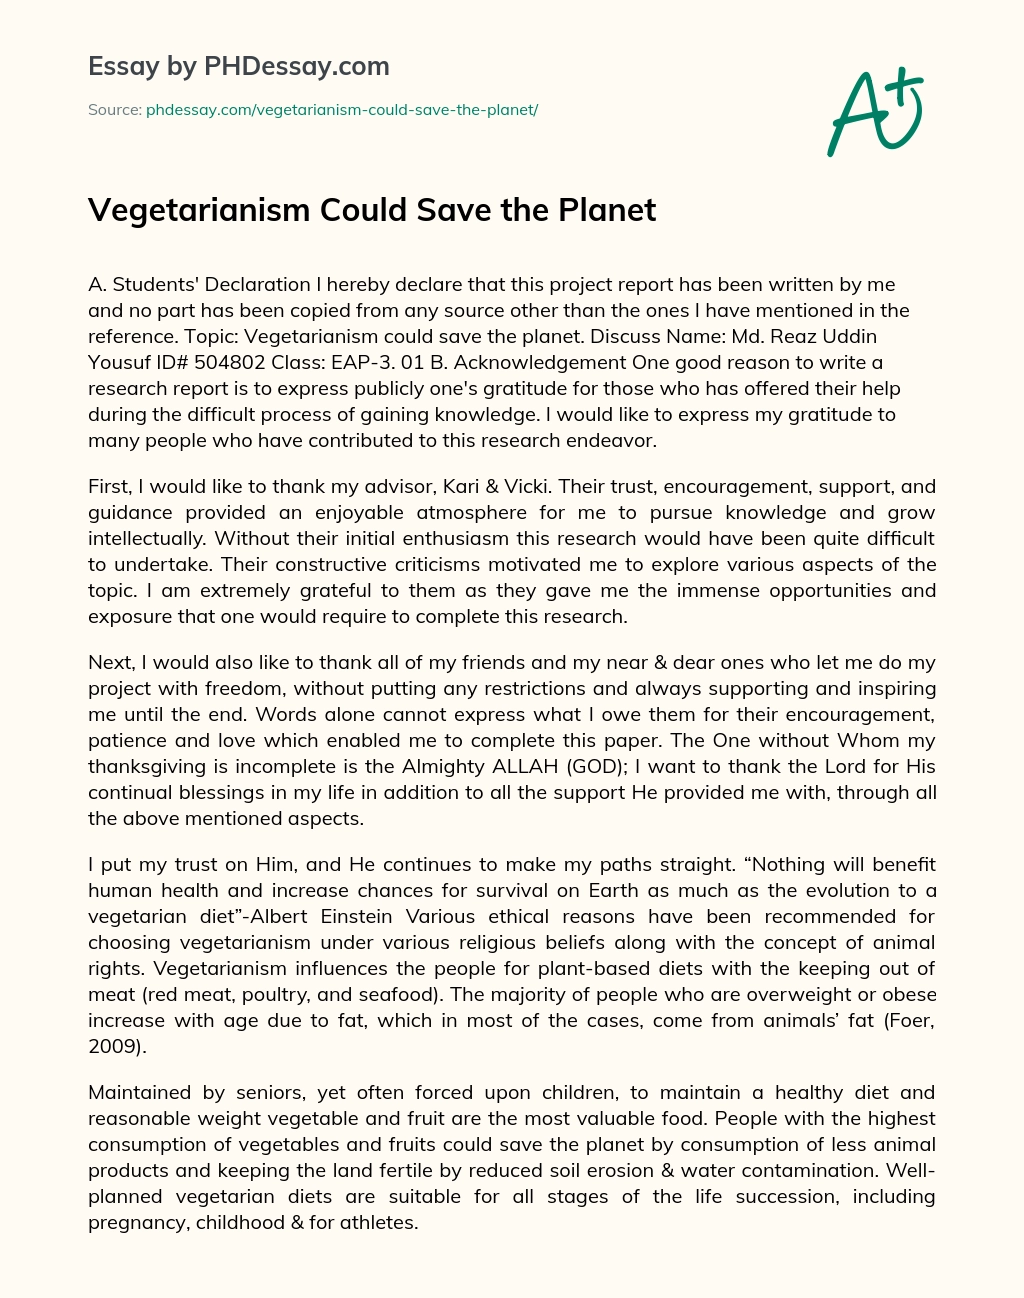 Vegetarianism Could Save the Planet essay